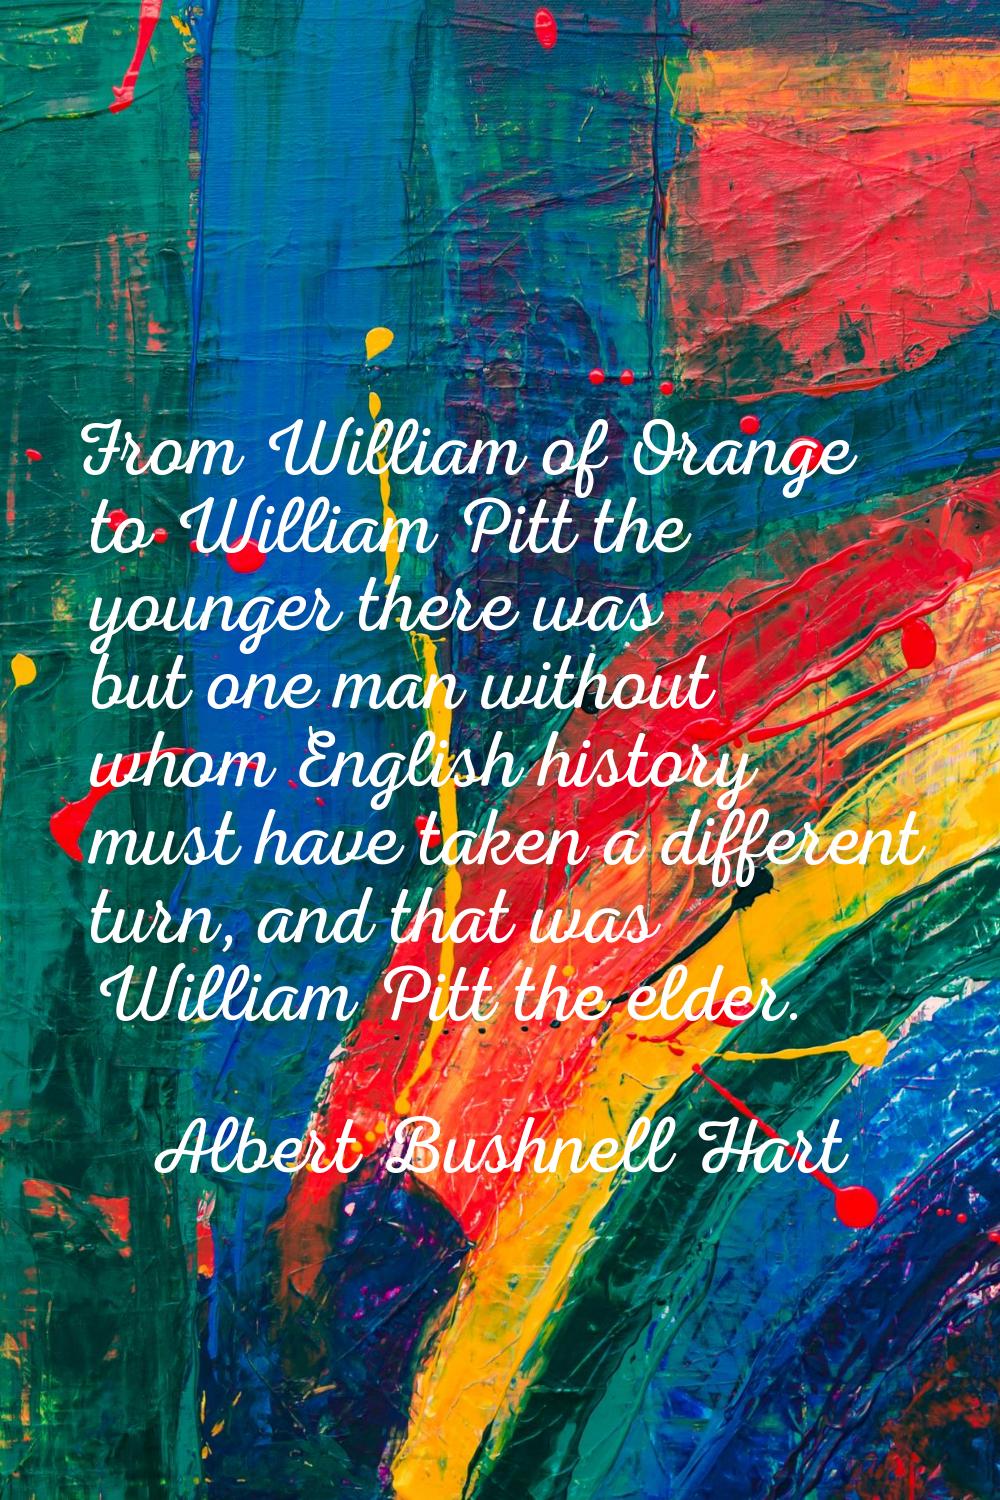 From William of Orange to William Pitt the younger there was but one man without whom English histo